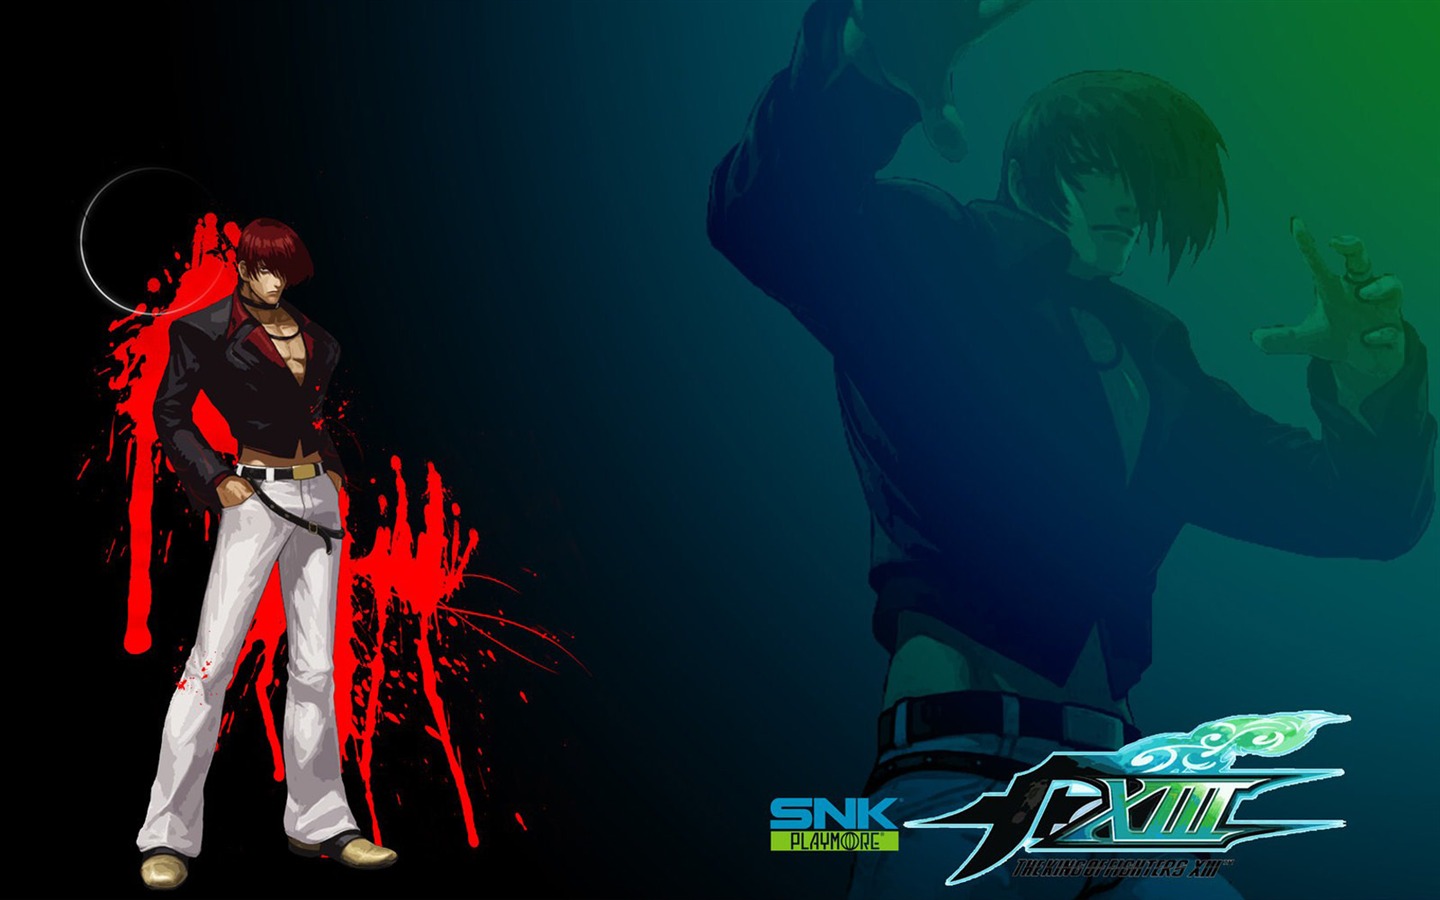 Le roi de wallpapers Fighters XIII #12 - 1440x900